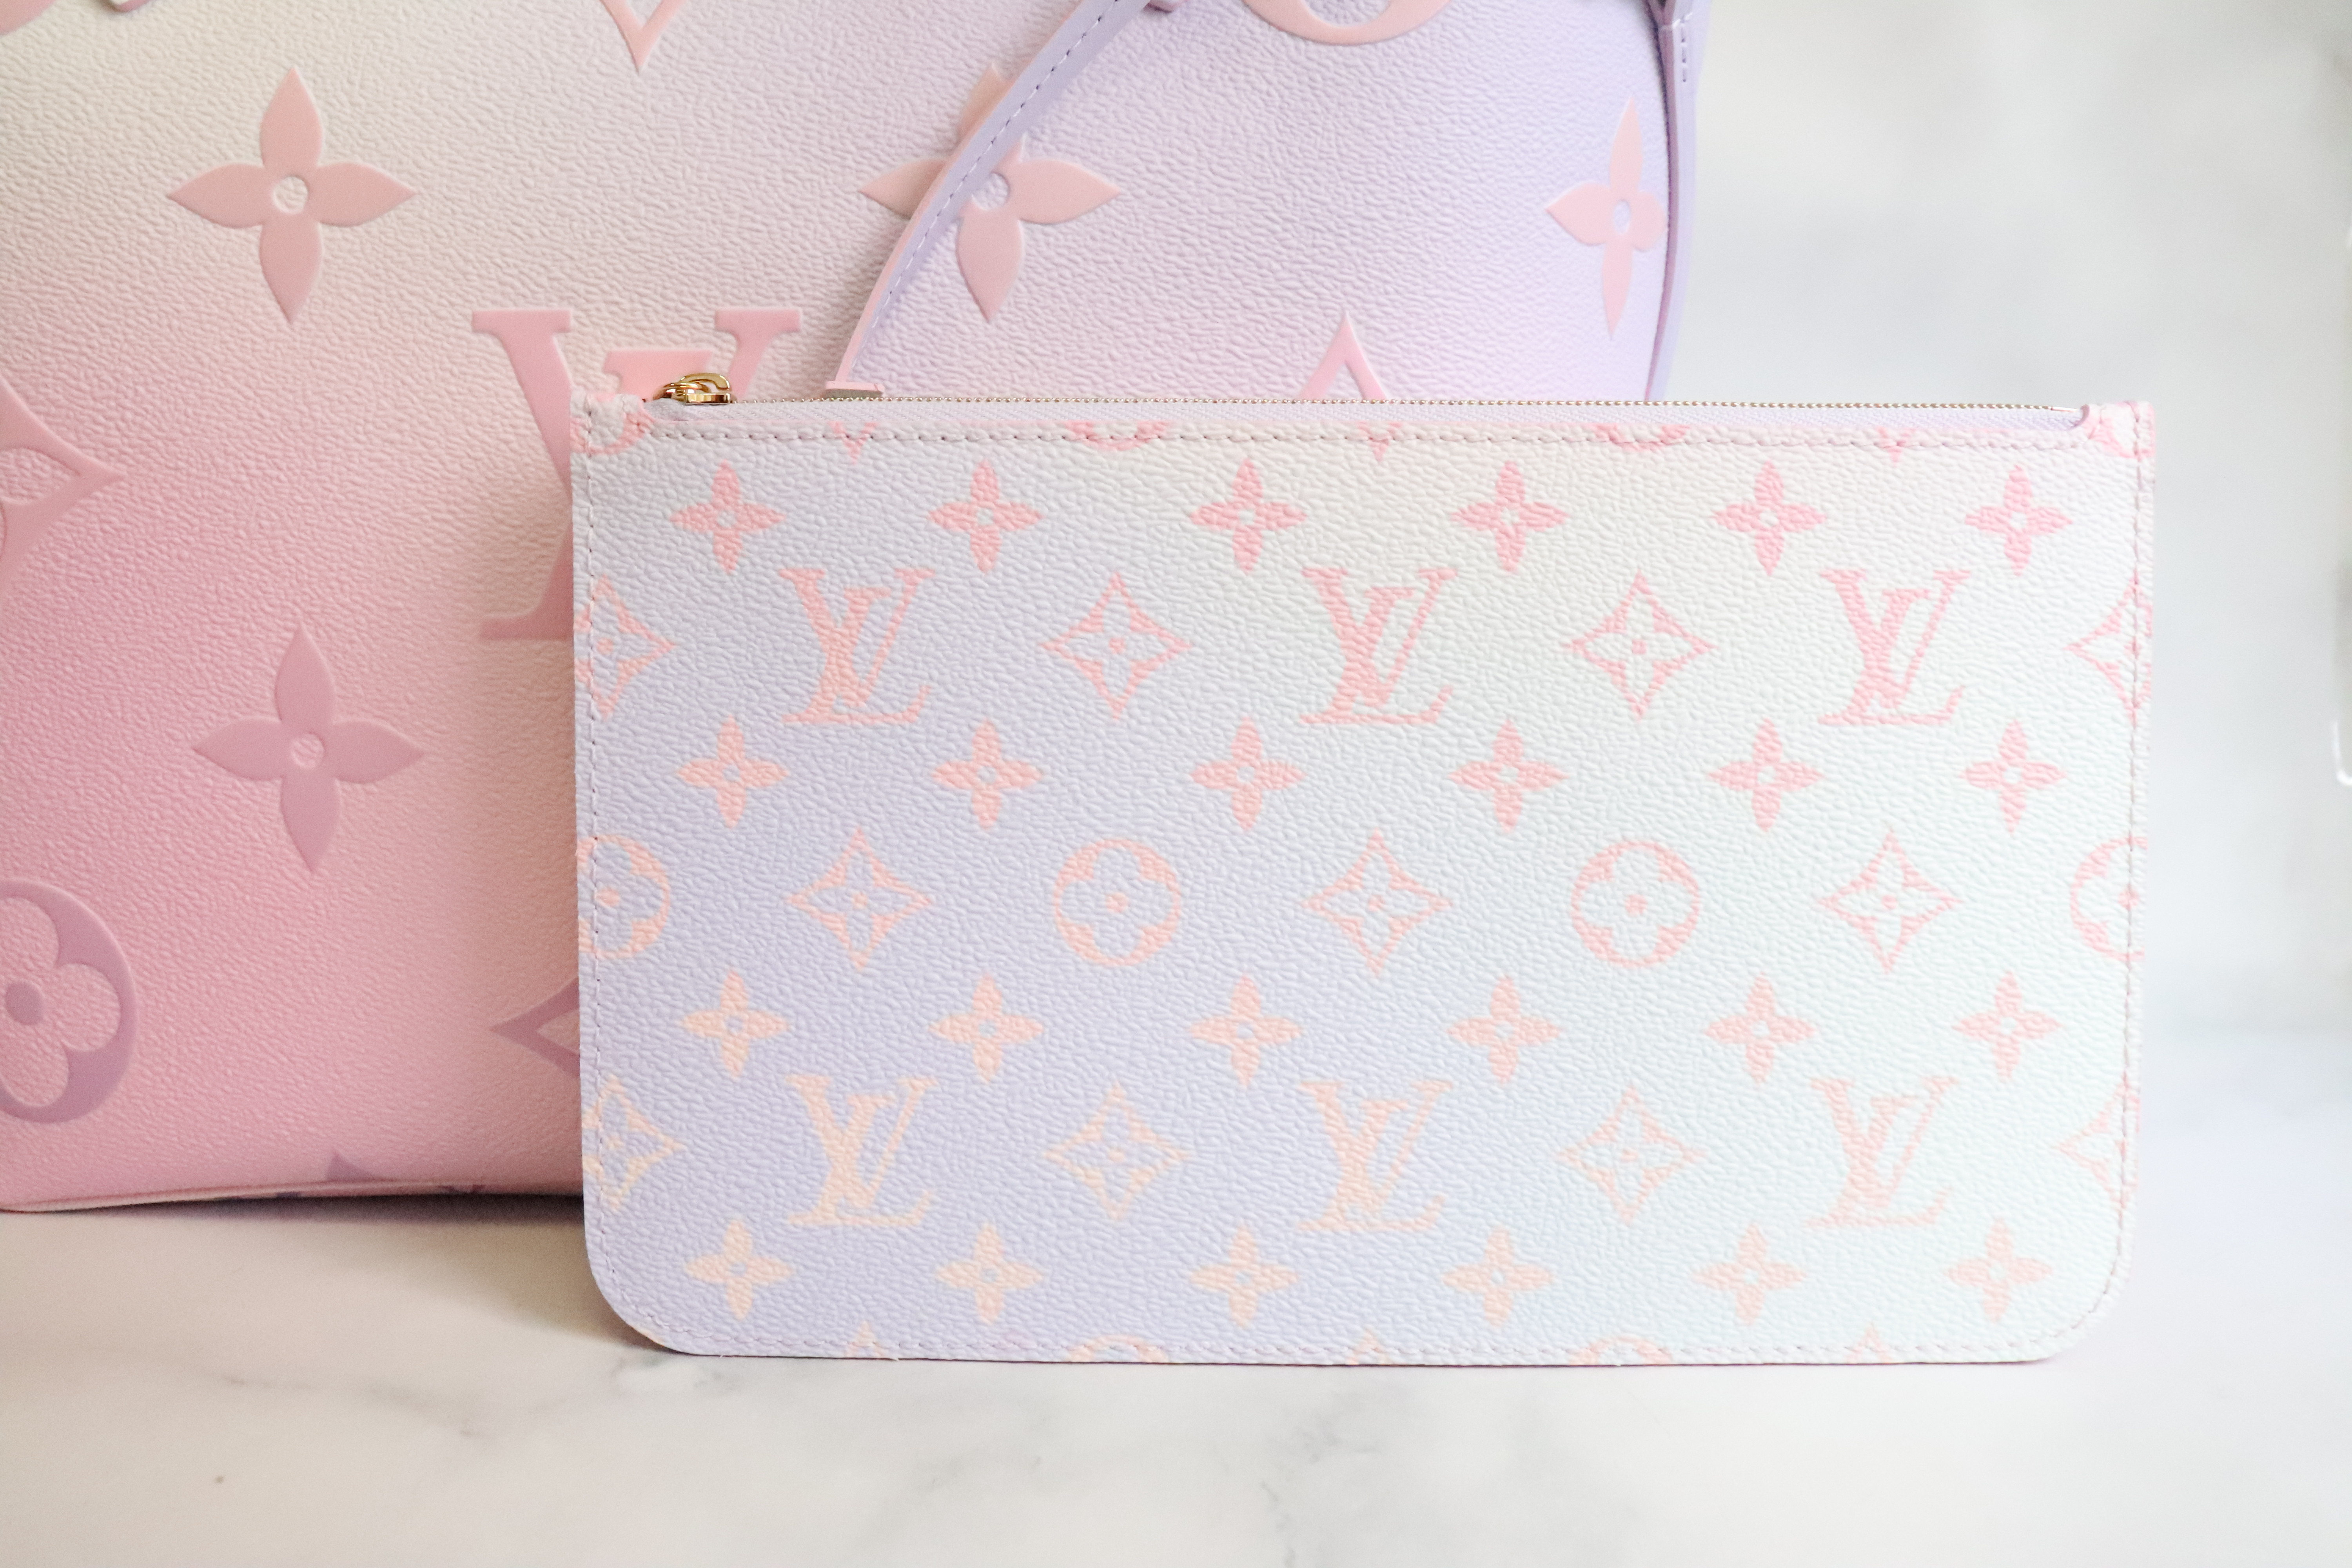 My birthday gift!! Louis Vuitton Sunrise Pastel Neverfull MM & Zippy  Wallet😭💘 I have been wanting this color way since the first day I saw it!  Literally my dream bag 👛 